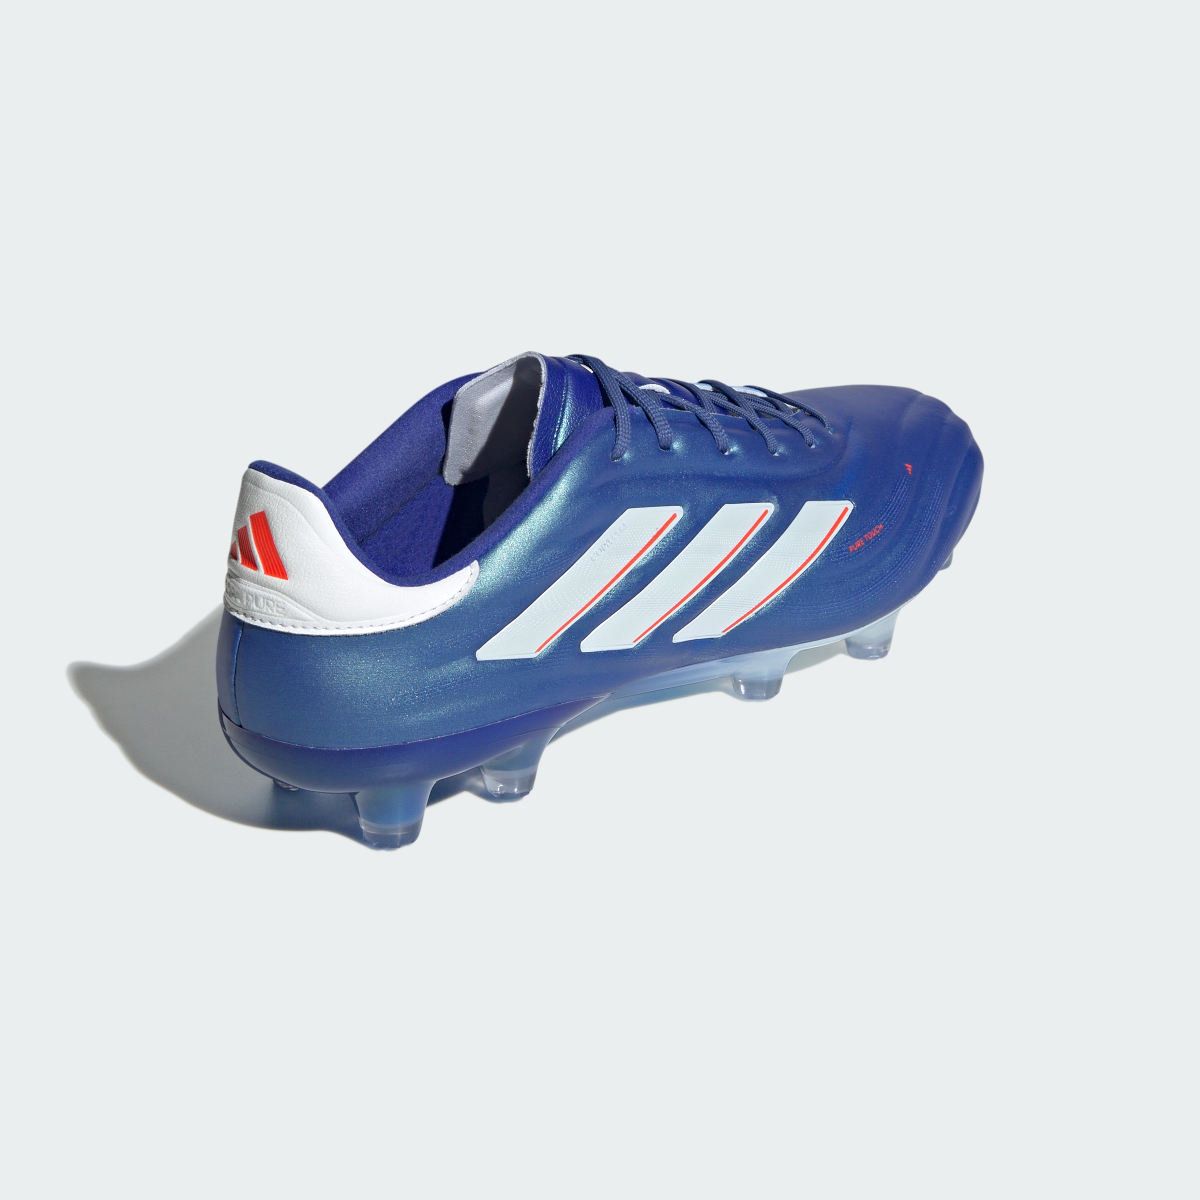 Adidas Copa Pure II.1 Firm Ground Boots. 9